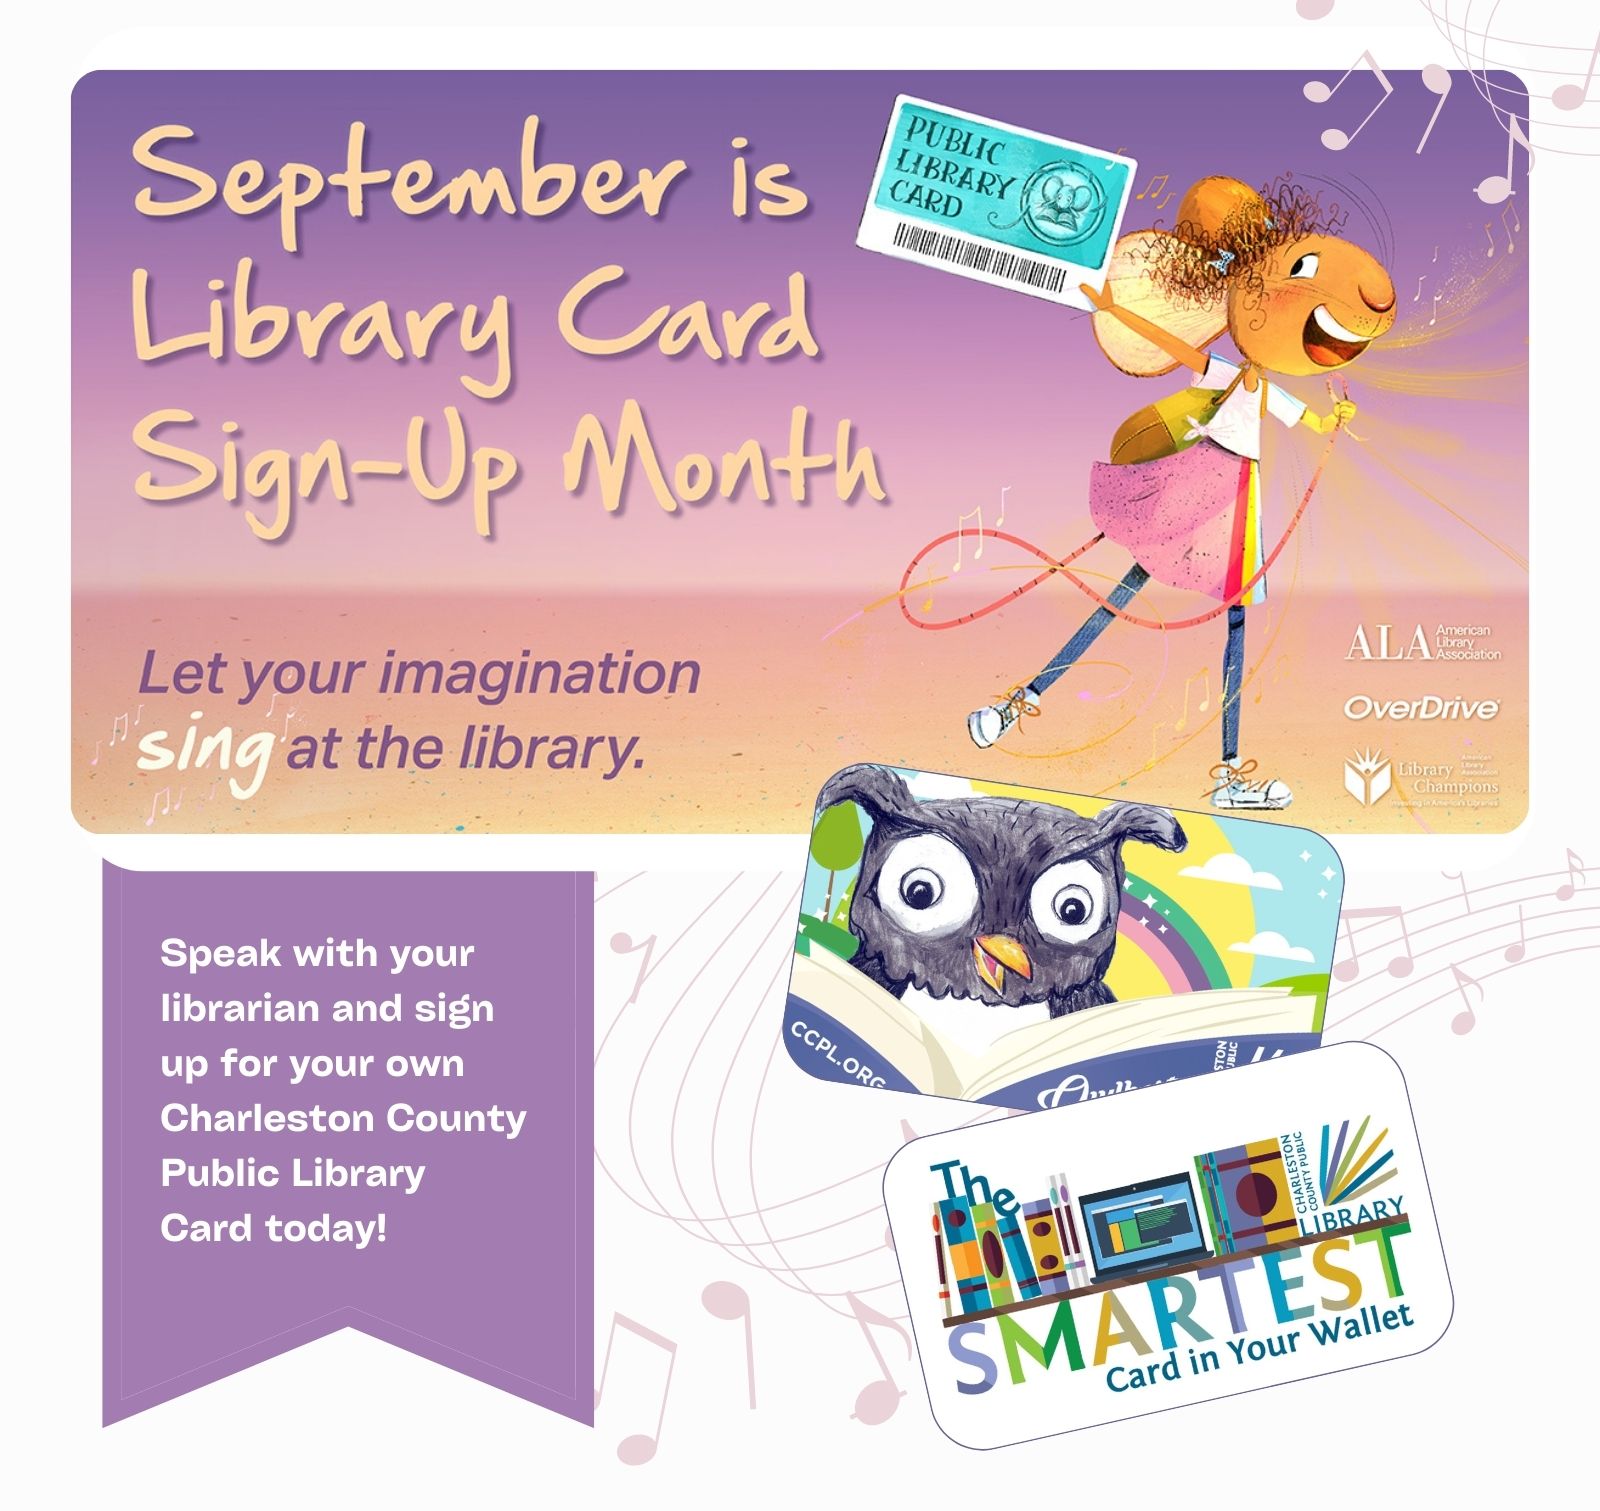 CCPL Celebrates Library Card Sign-Up Month in September